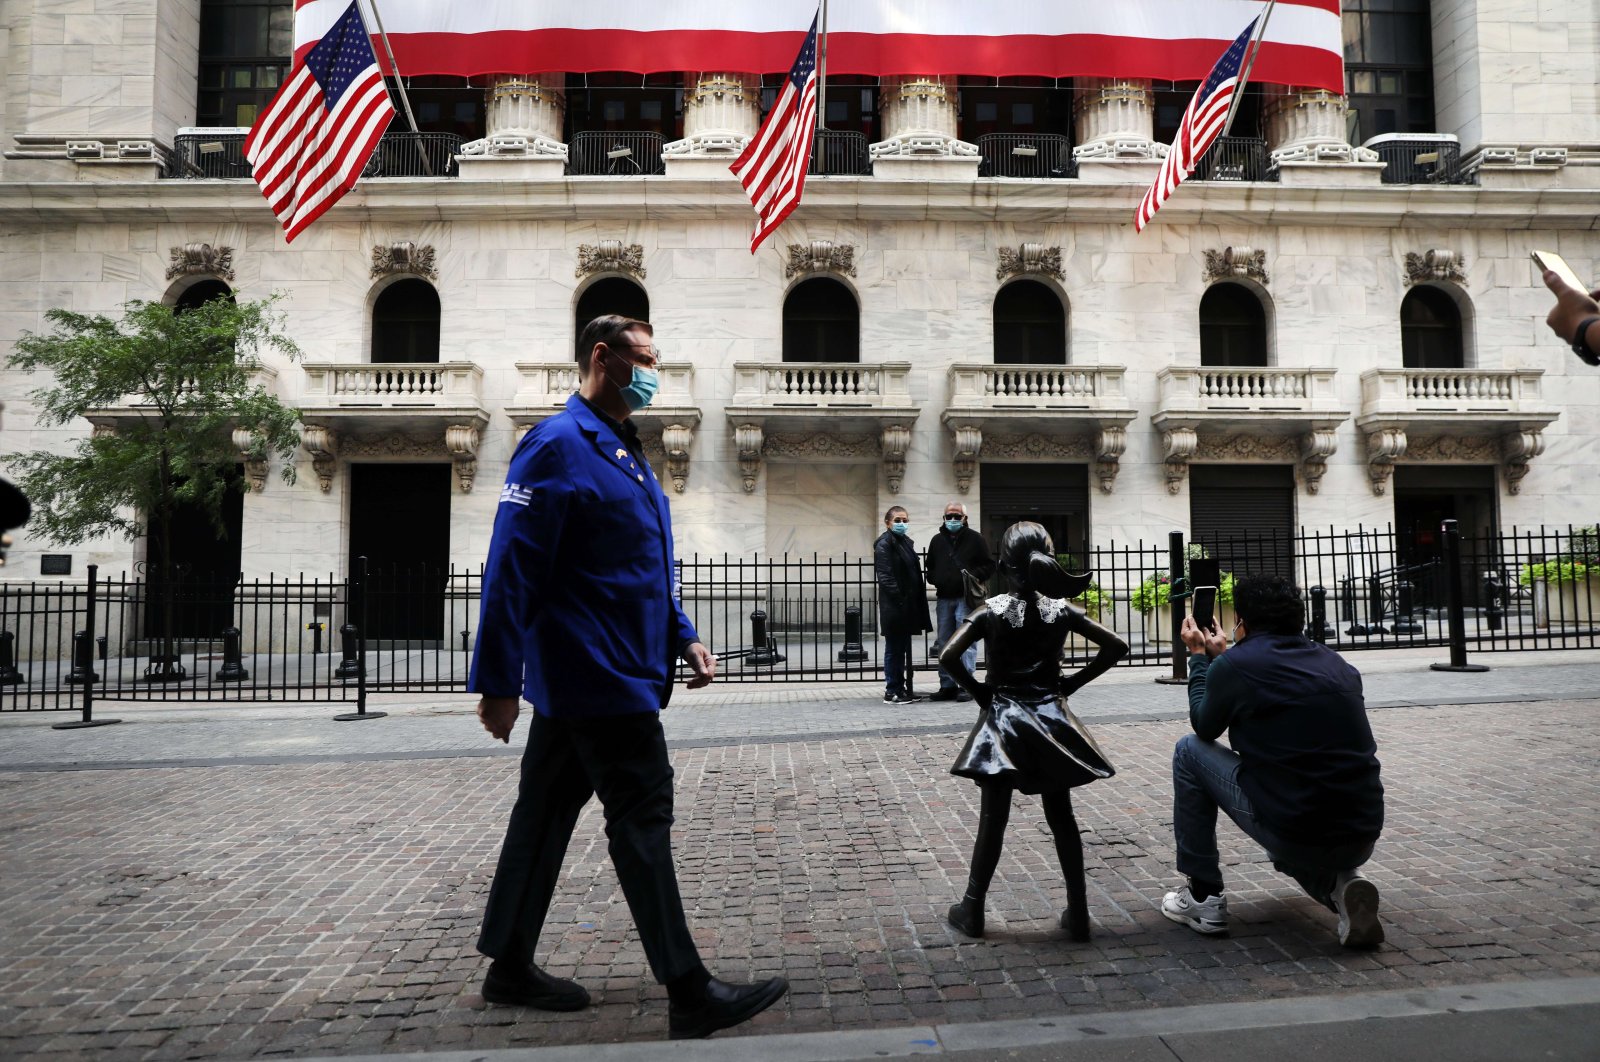 People walk in front of the New York Stock Exchange (NYSE) in lower Manhattan, New York City, Sept. 21, 2020. (AFP Photo)